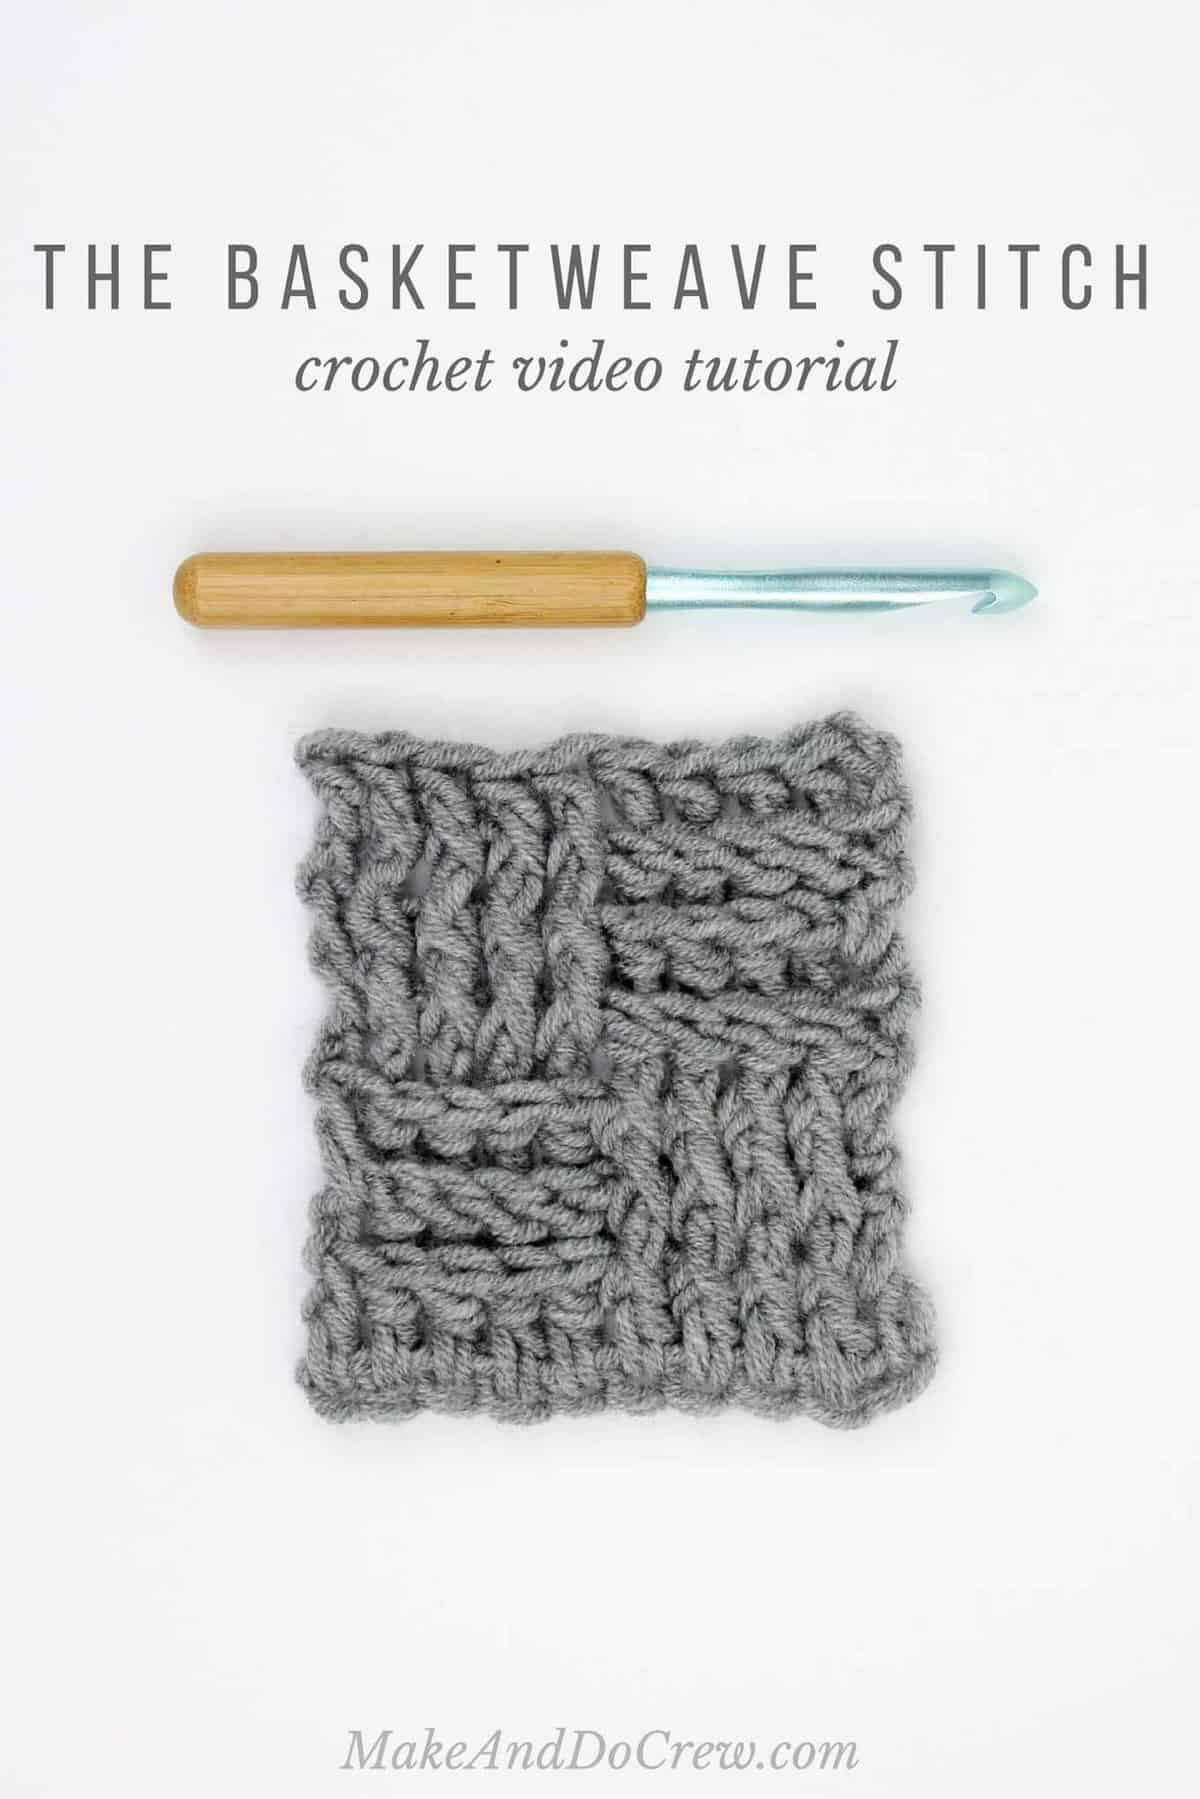 Learn how to crochet the basket weave stitch in this step-by-step video tutorial. The basket weave stitch is modern, beautifully textured and perfect for afghans and blankets. 